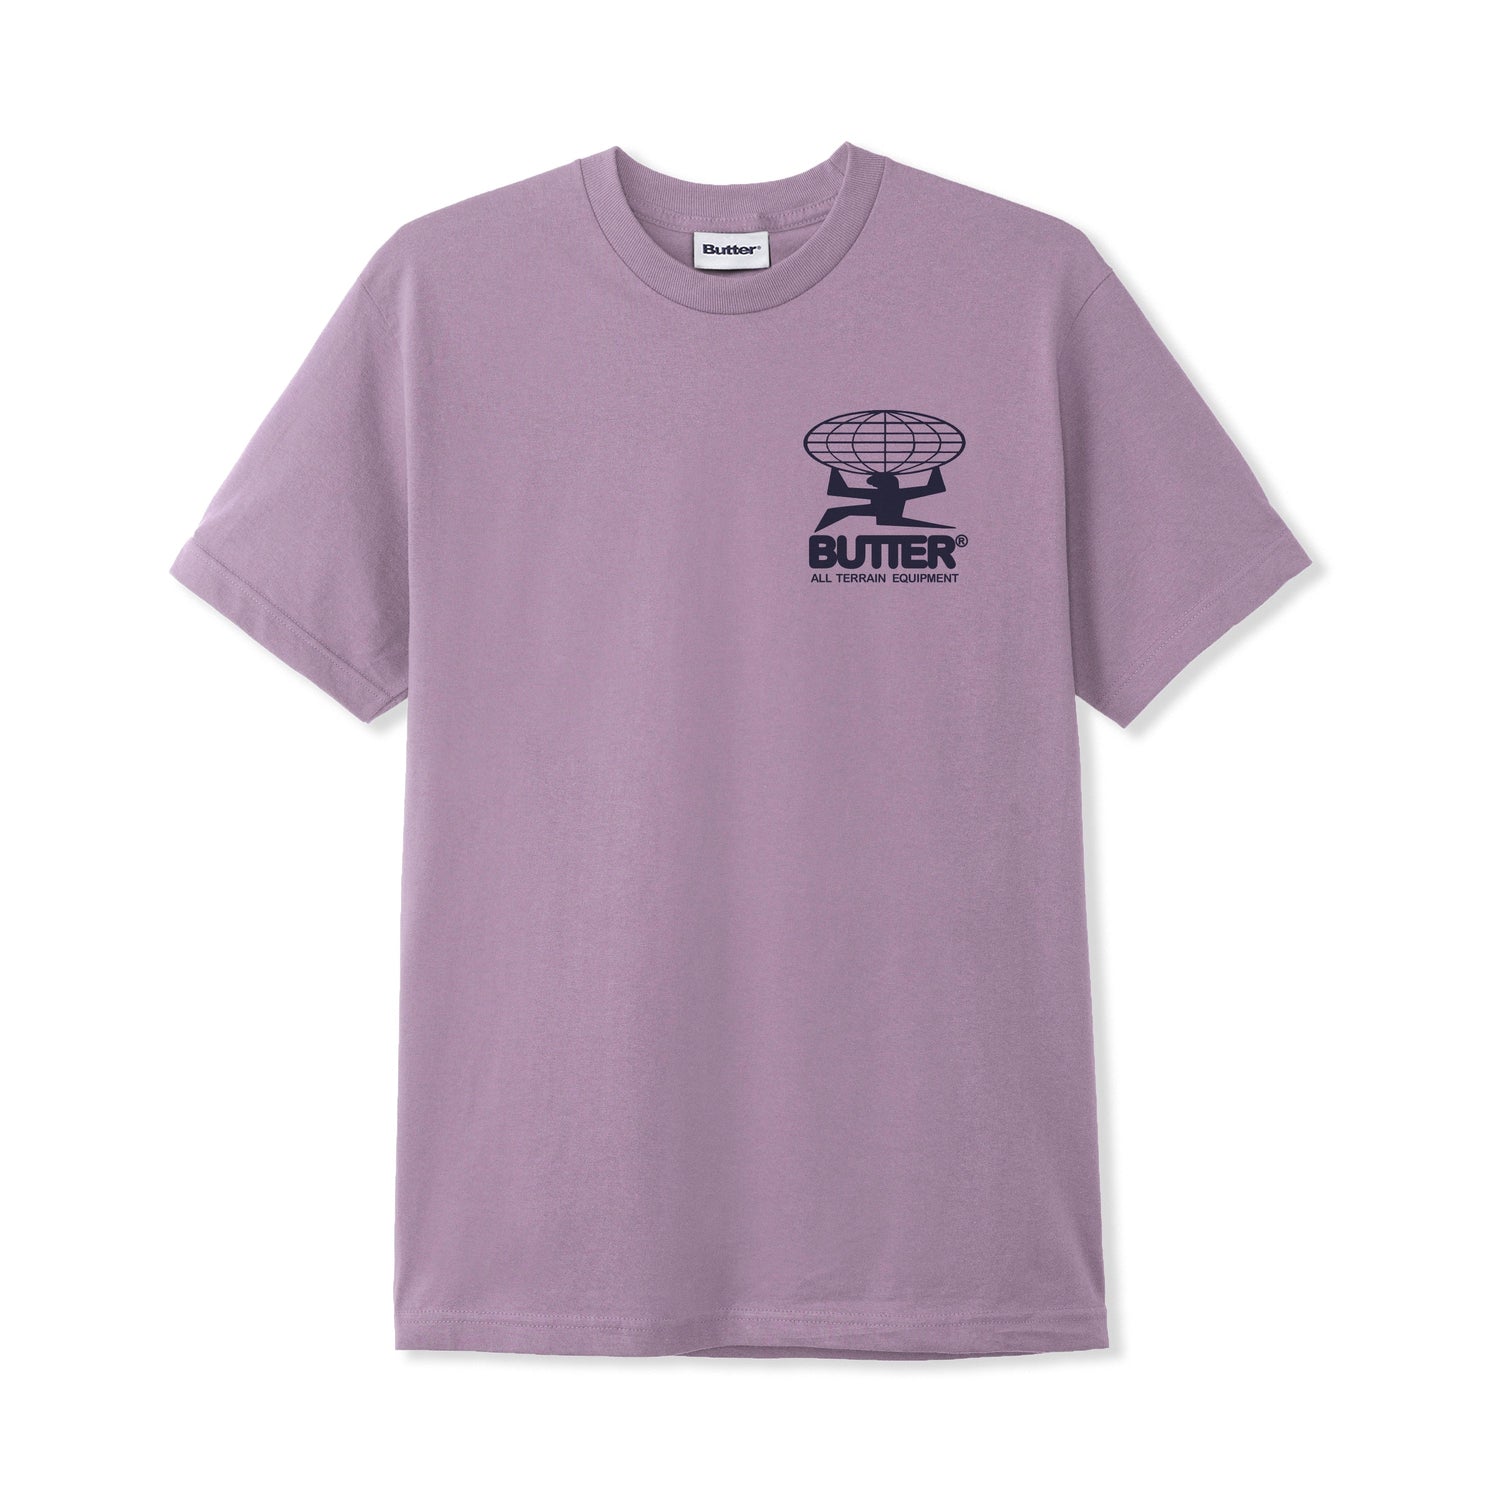 All Terrain Tee, Washed Berry